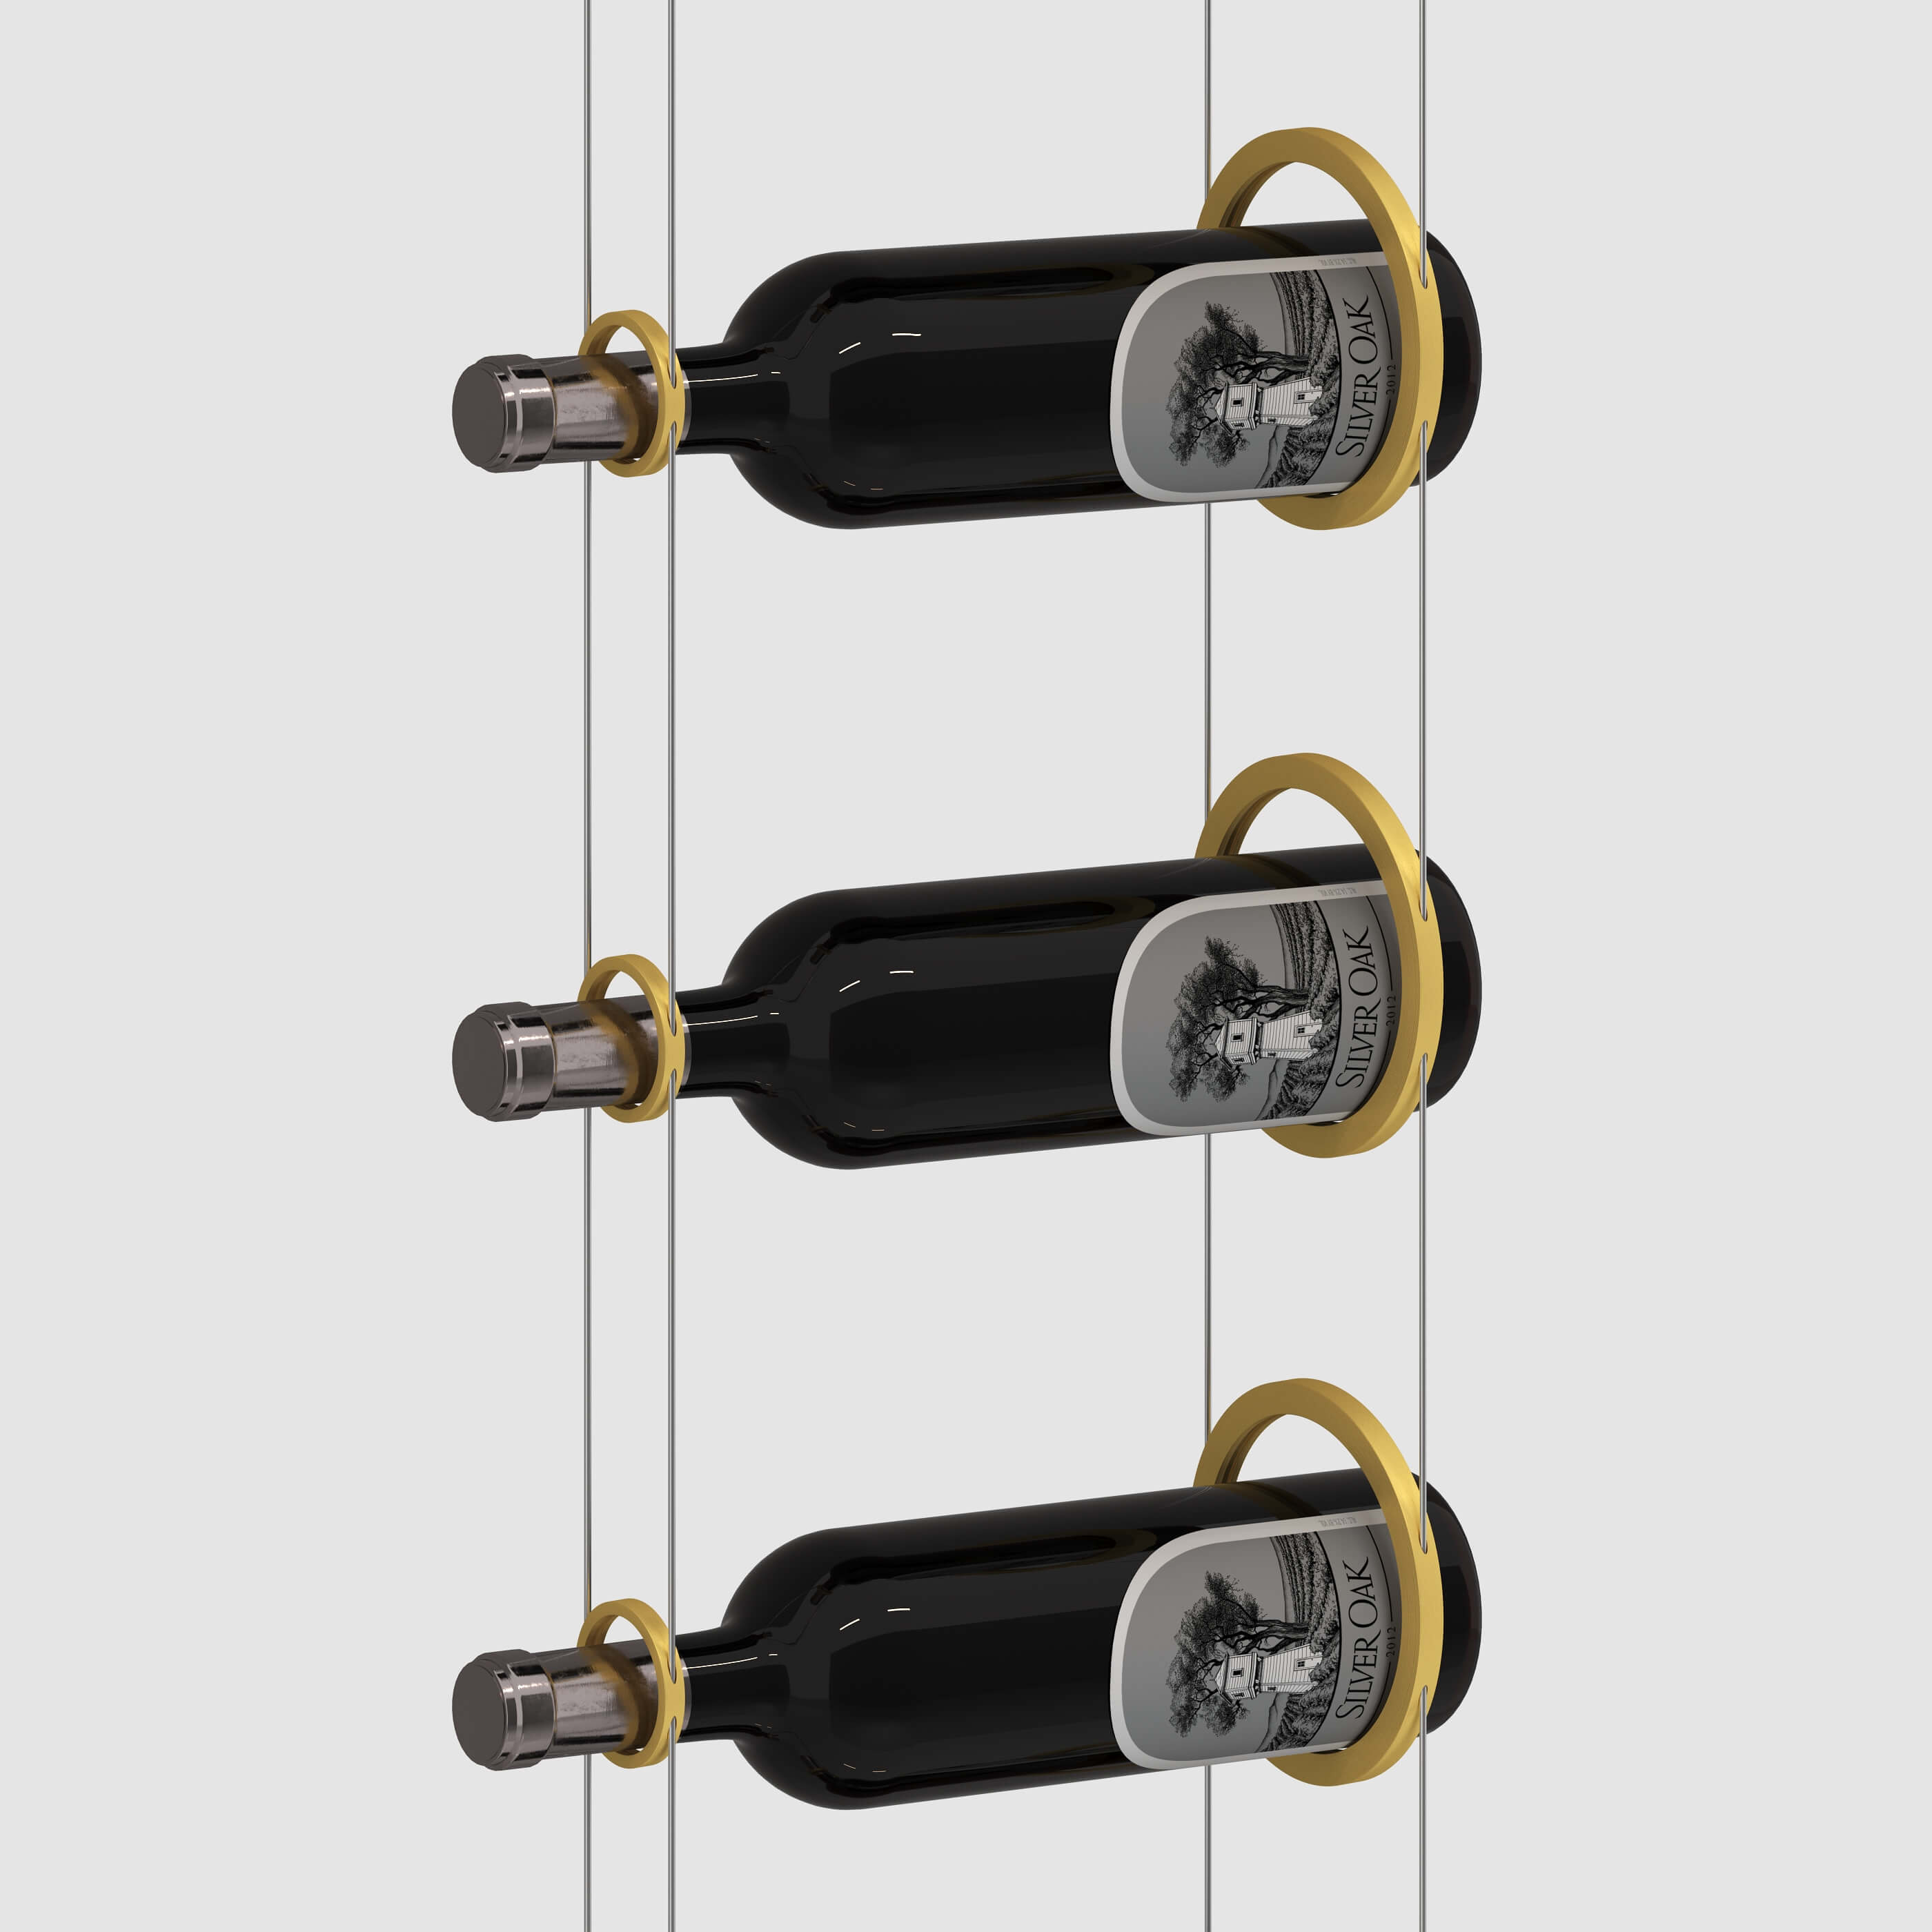 cable wine racking system gold rings designed by genuwine cellars